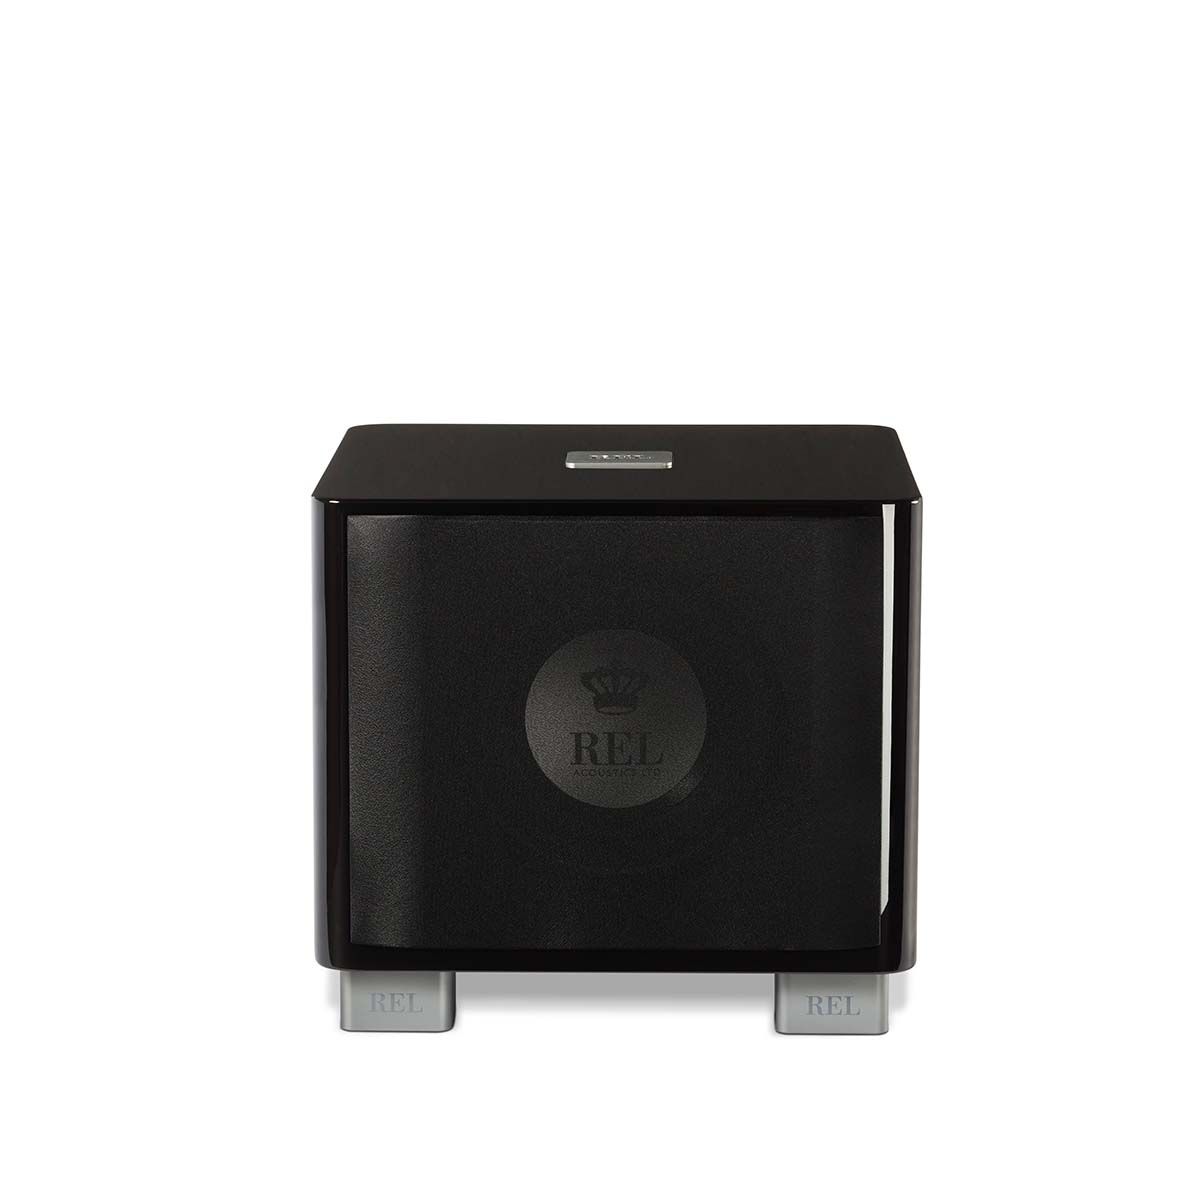 REL T/7x Subwoofer, black, front view with grille